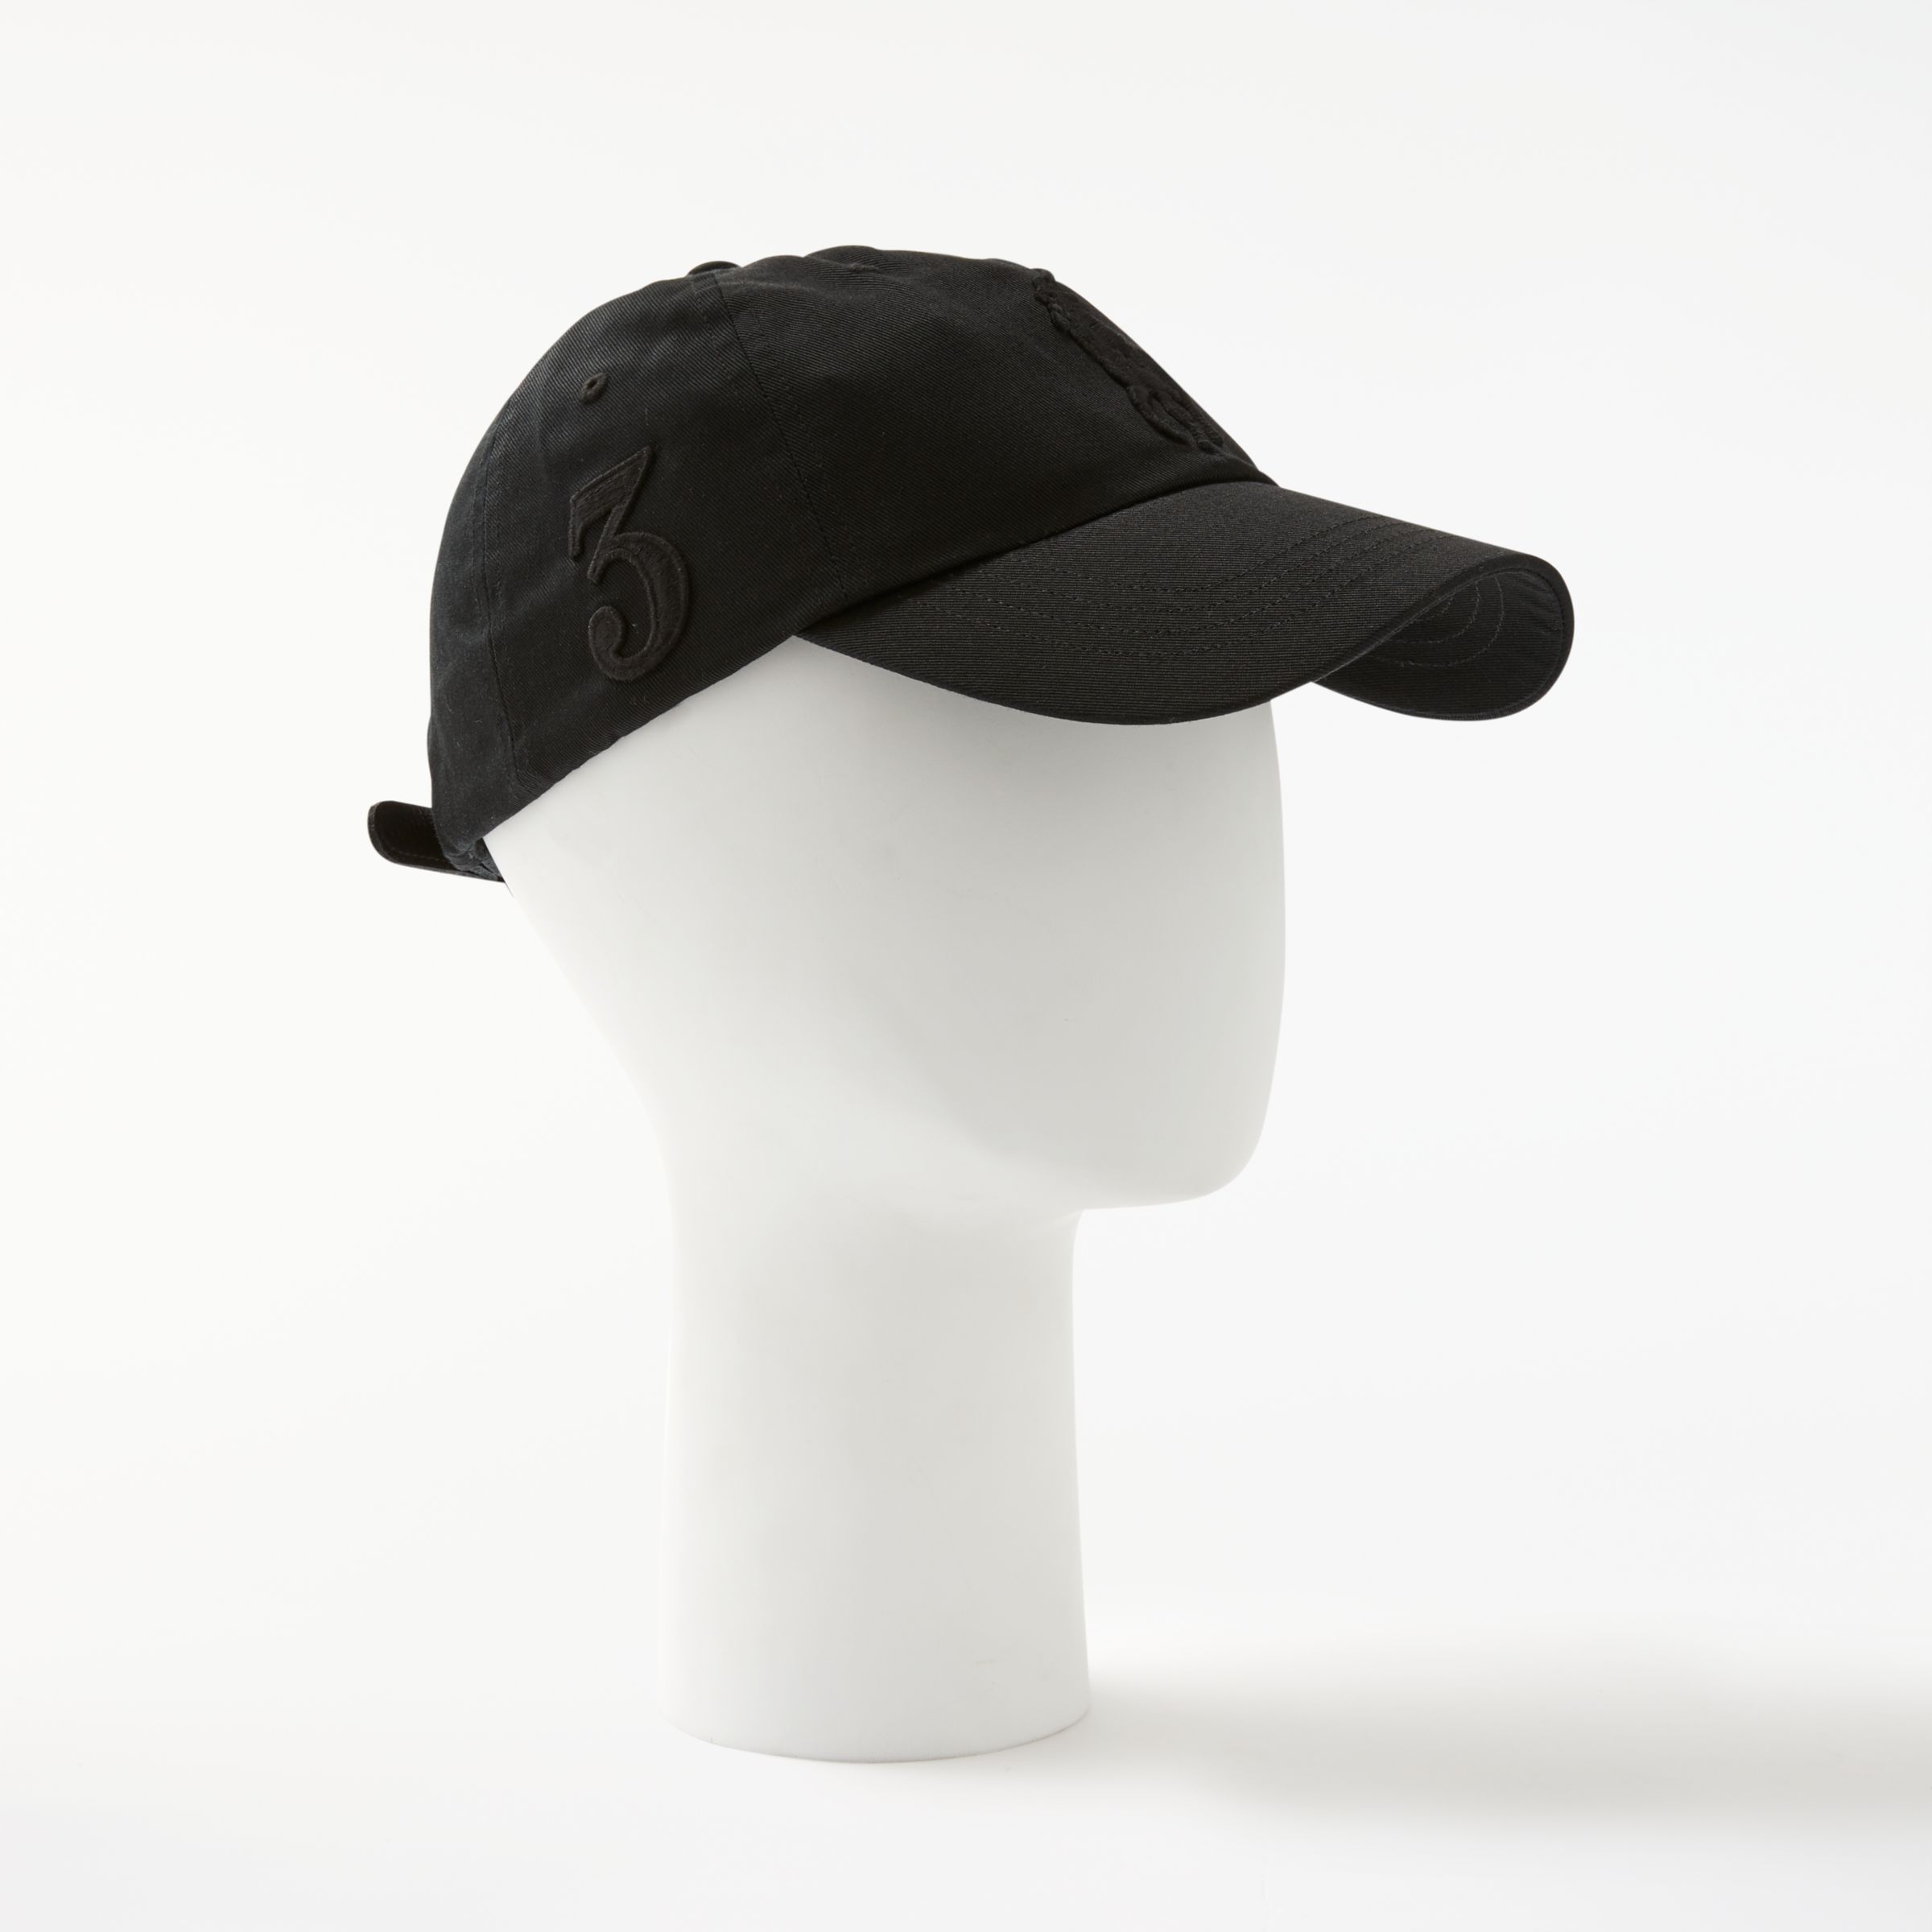 polo hats online